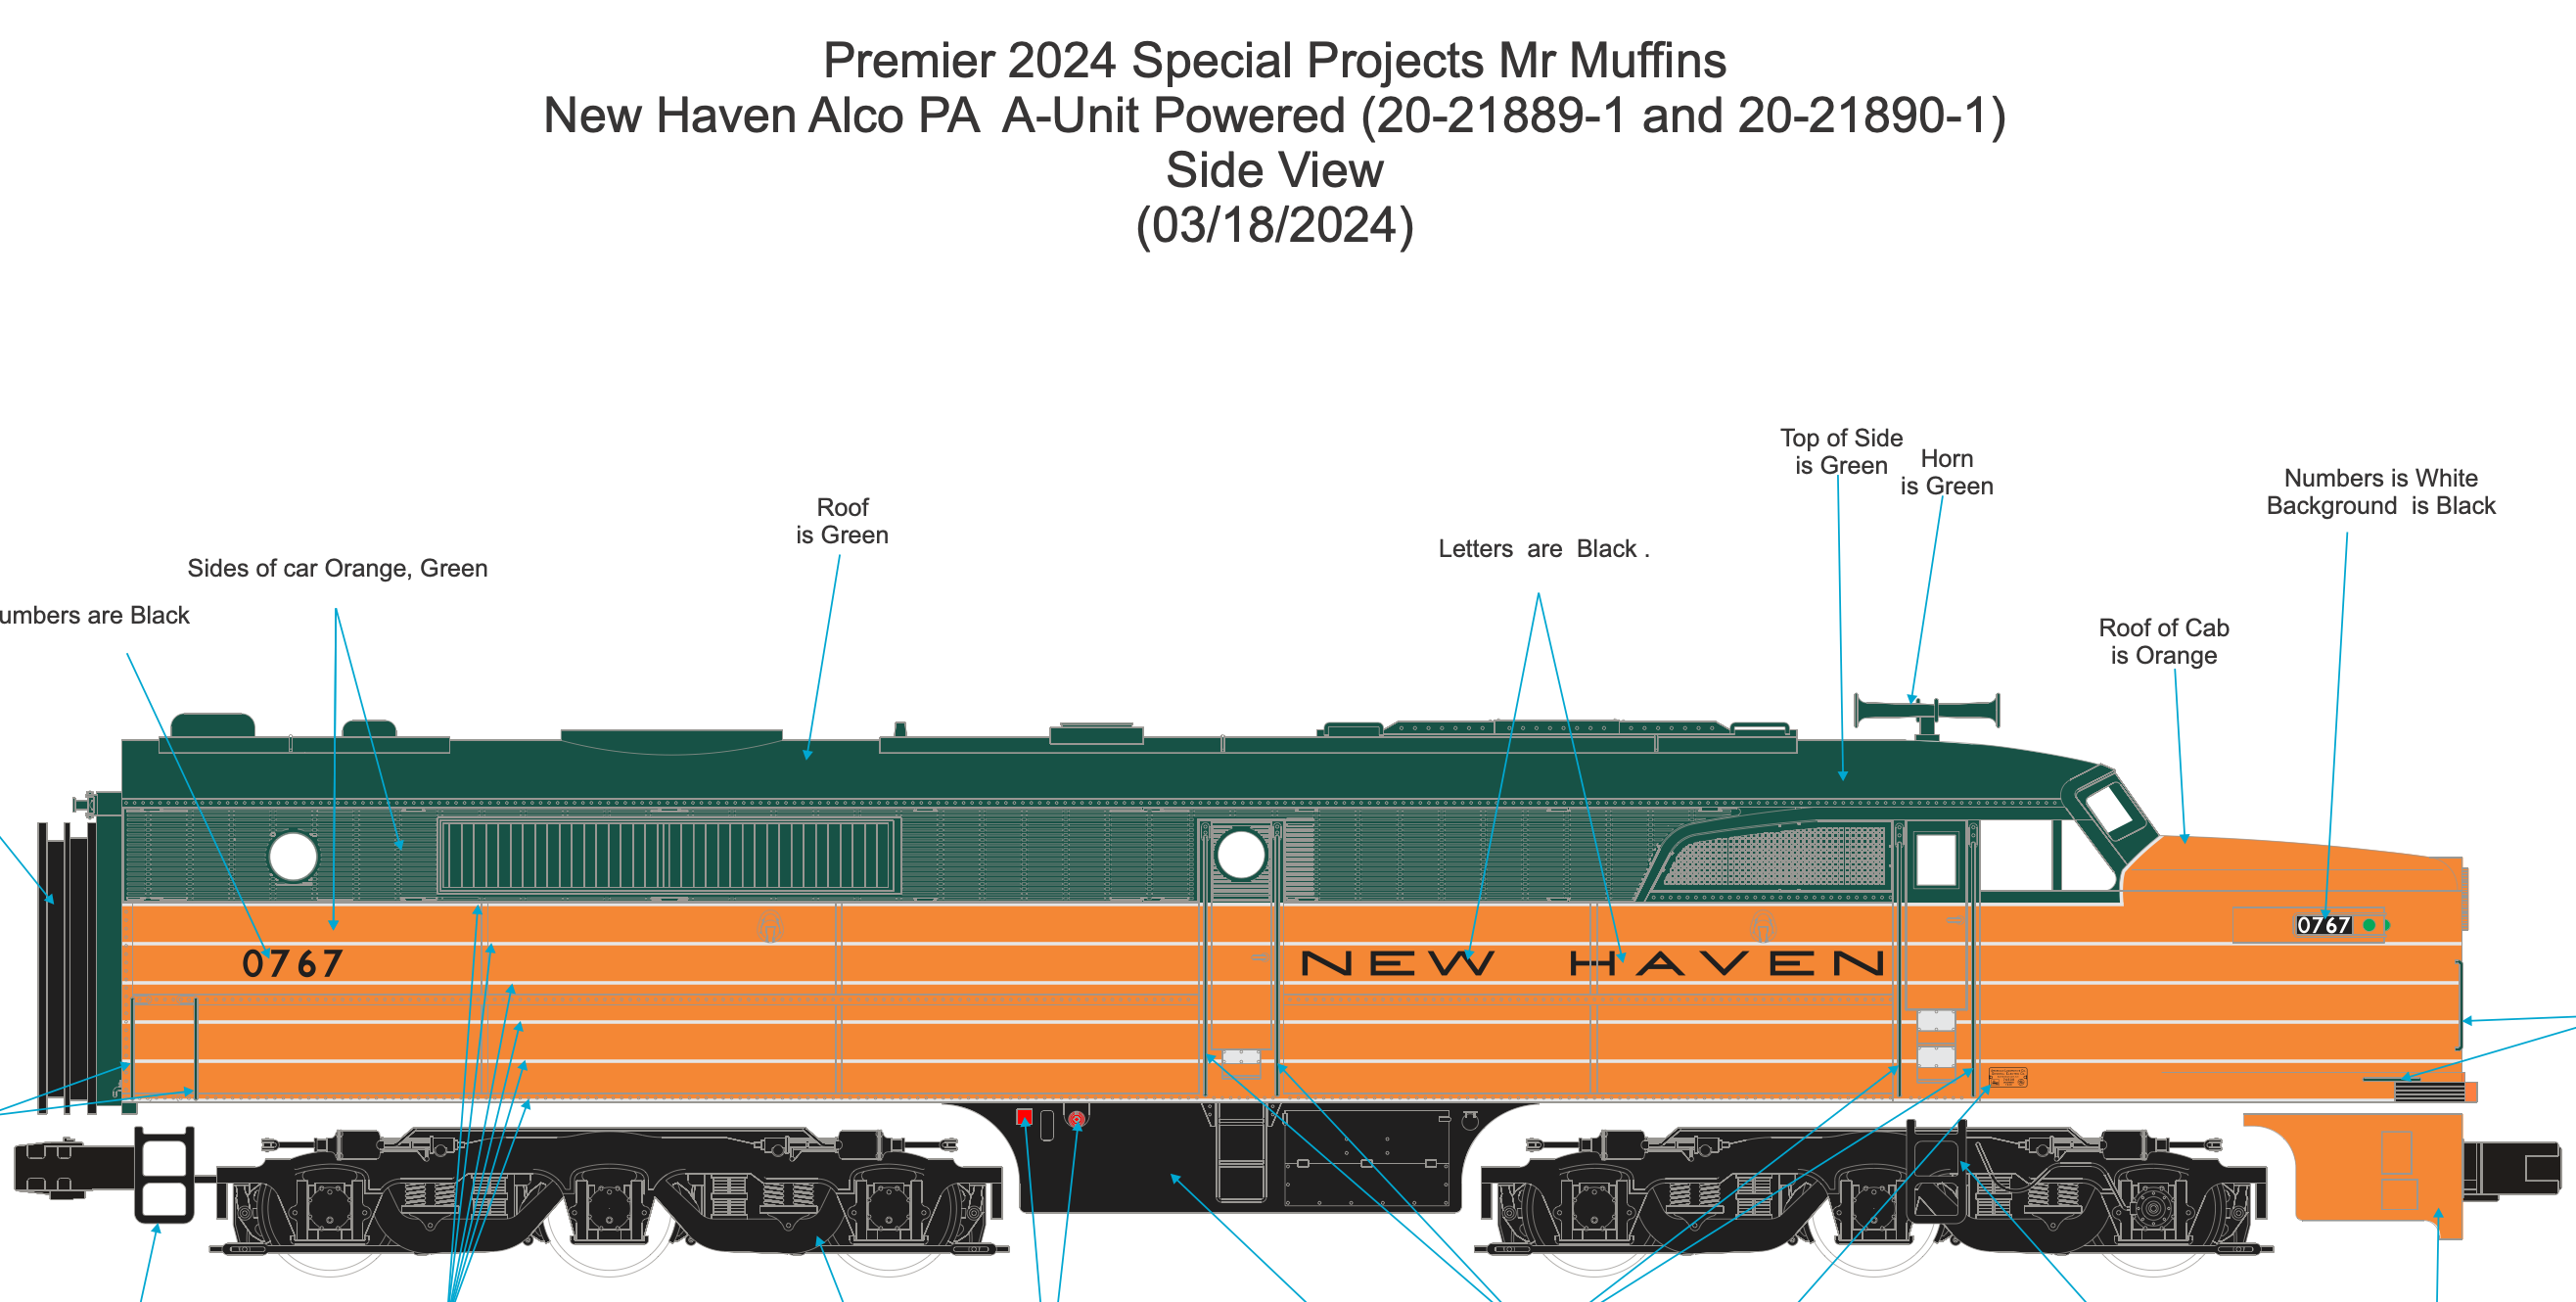 MTH 20-21890-1 - Alco PA A Unit Diesel Locomotive "New Haven" #0770 w/ PS3 - Custom Run for MrMuffin'sTrains